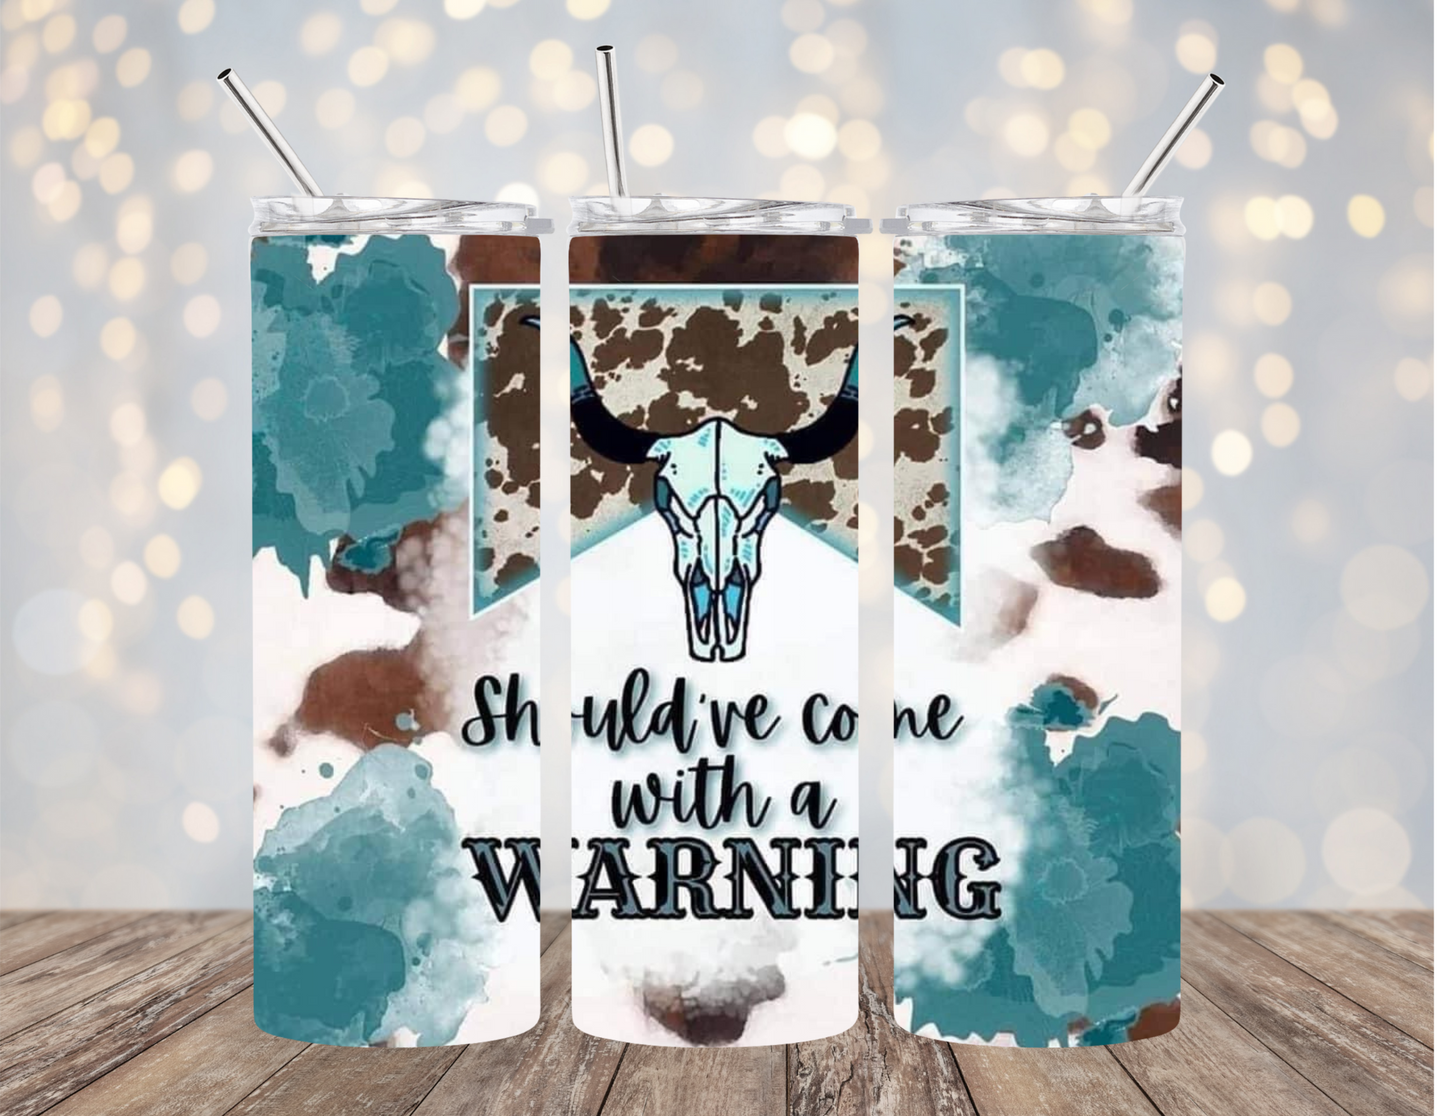 Should've Came with a Warning - Brown & Teal Spots - Tumbler